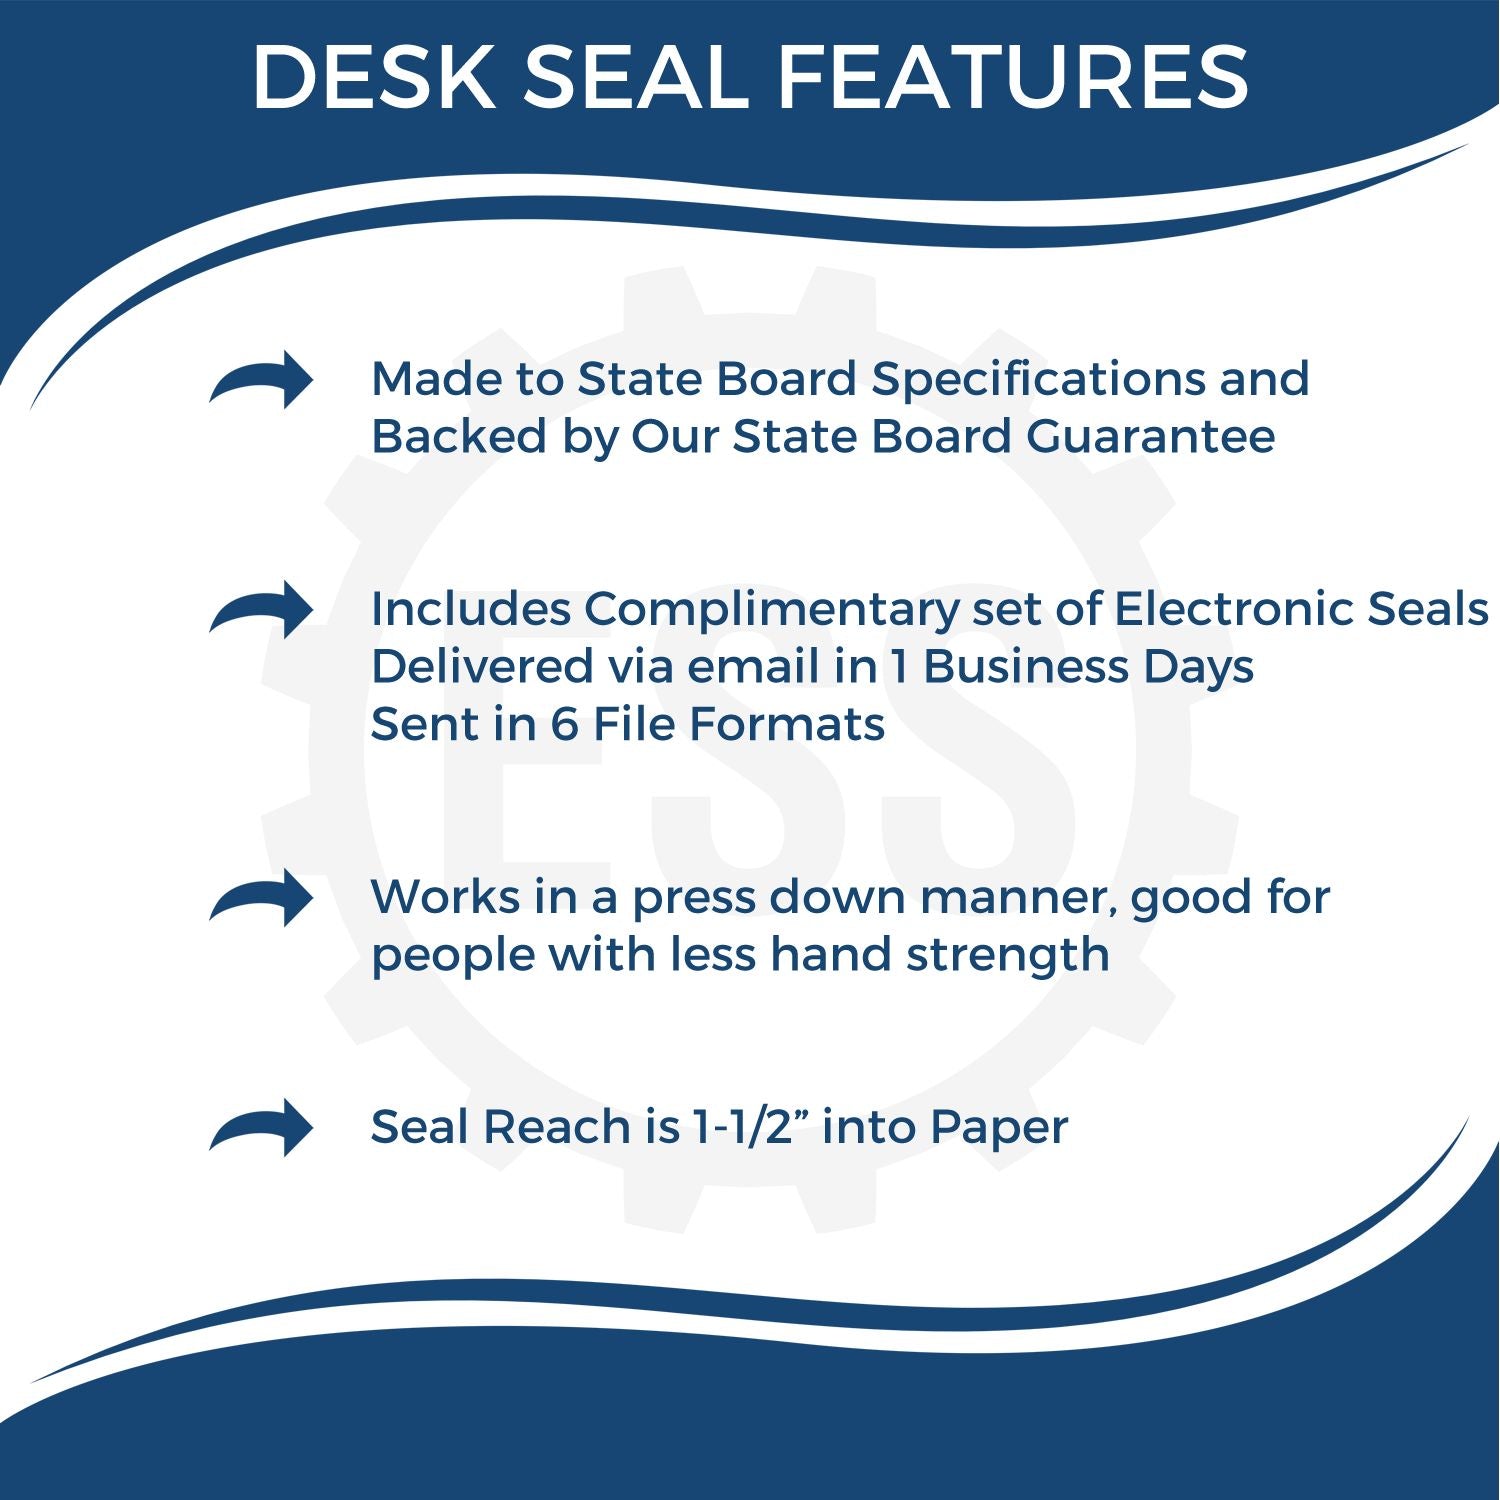 A picture of an infographic highlighting the selling points for the New Mexico Desk Surveyor Seal Embosser